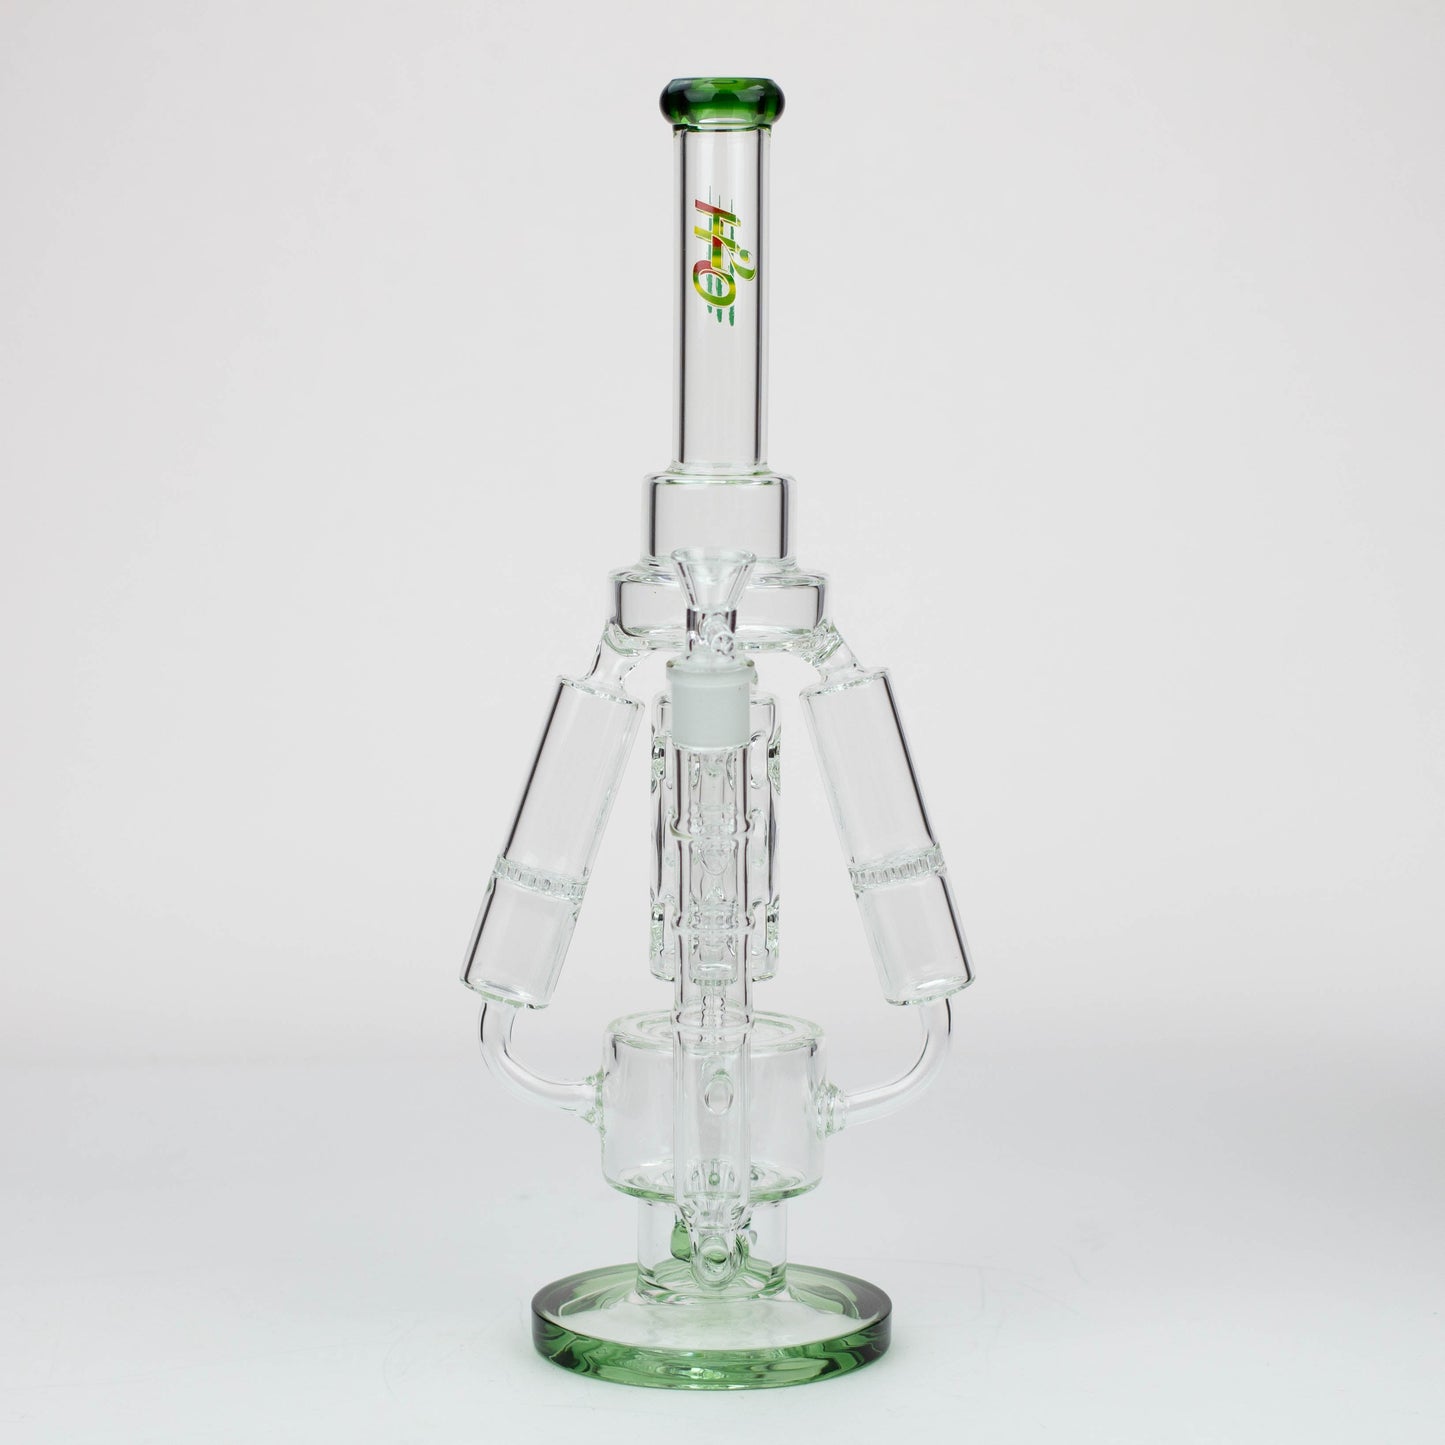 17" H2O Three Honeycomb silnders glass water recycle bong [H2O-25]_8